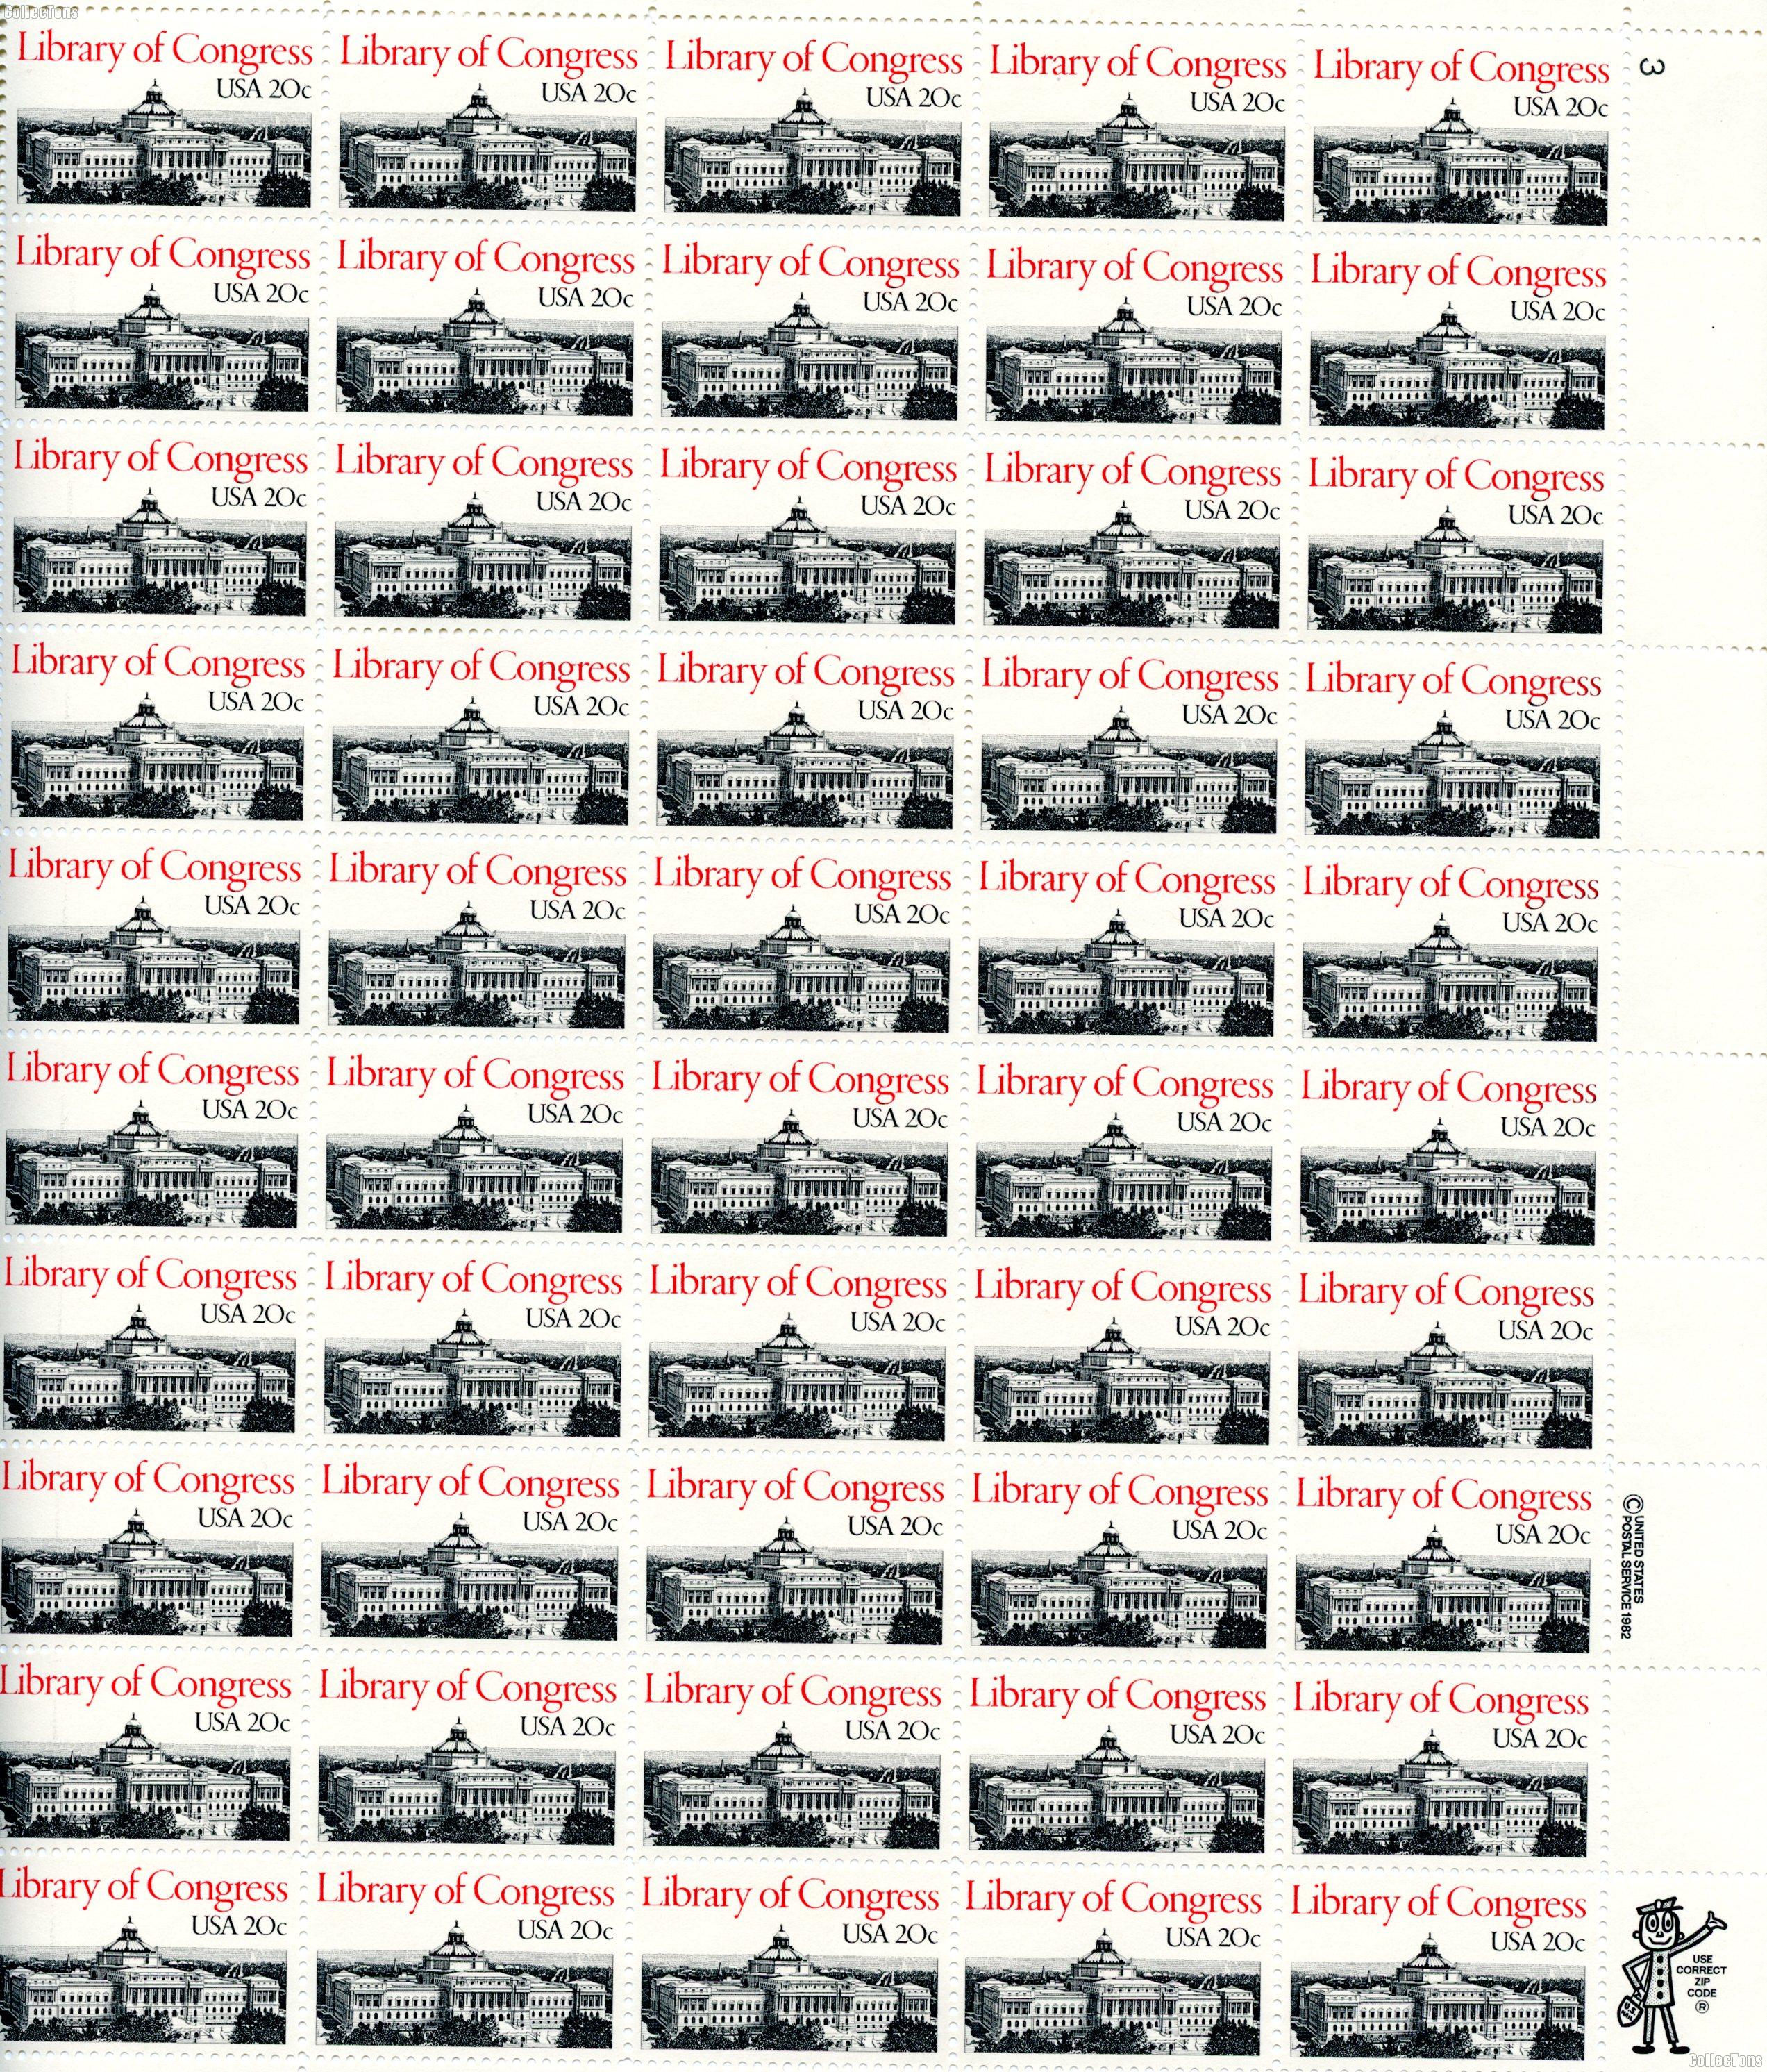 1982 Library of Congress 20 Cent US Postage Stamp MNH Sheet of 50 Scott #2004